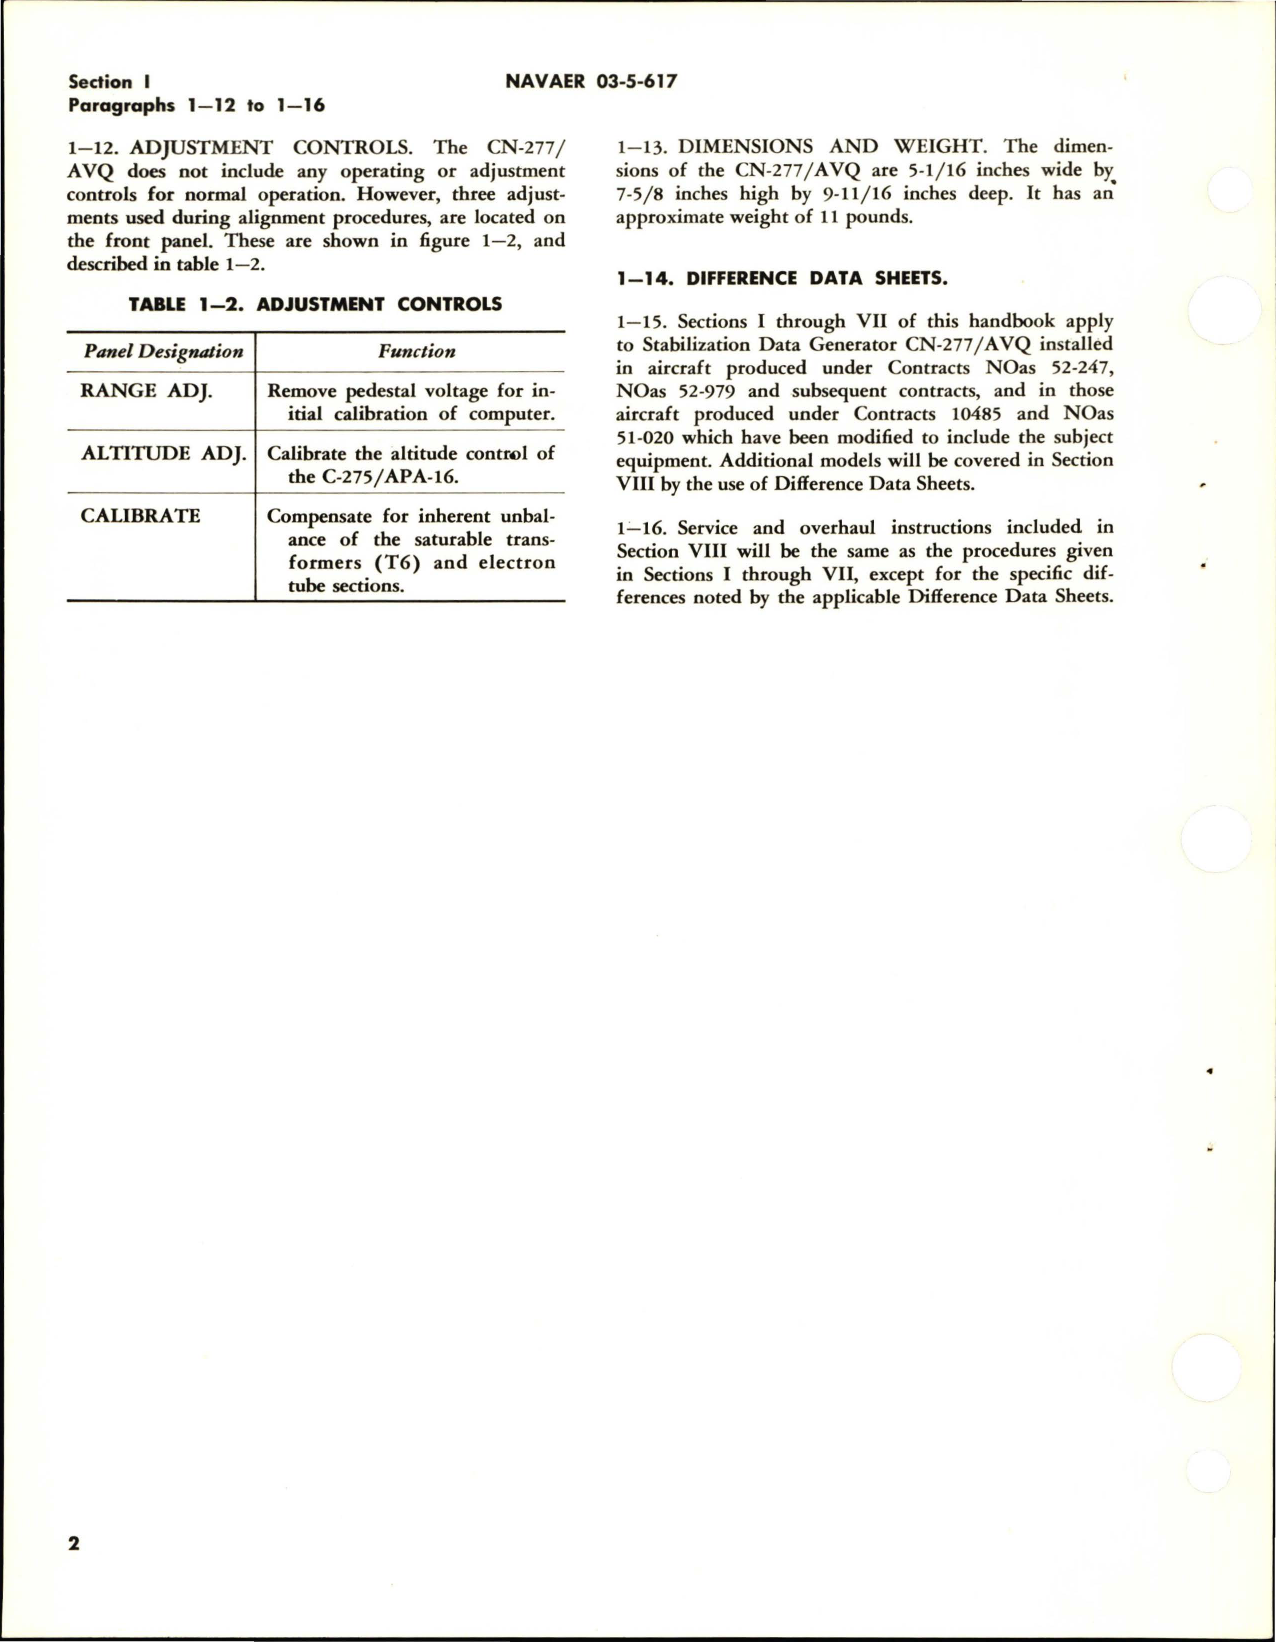 Sample page 8 from AirCorps Library document: Service and Overhaul Instructions for Stabilization Data Generator - CN-277-AVG